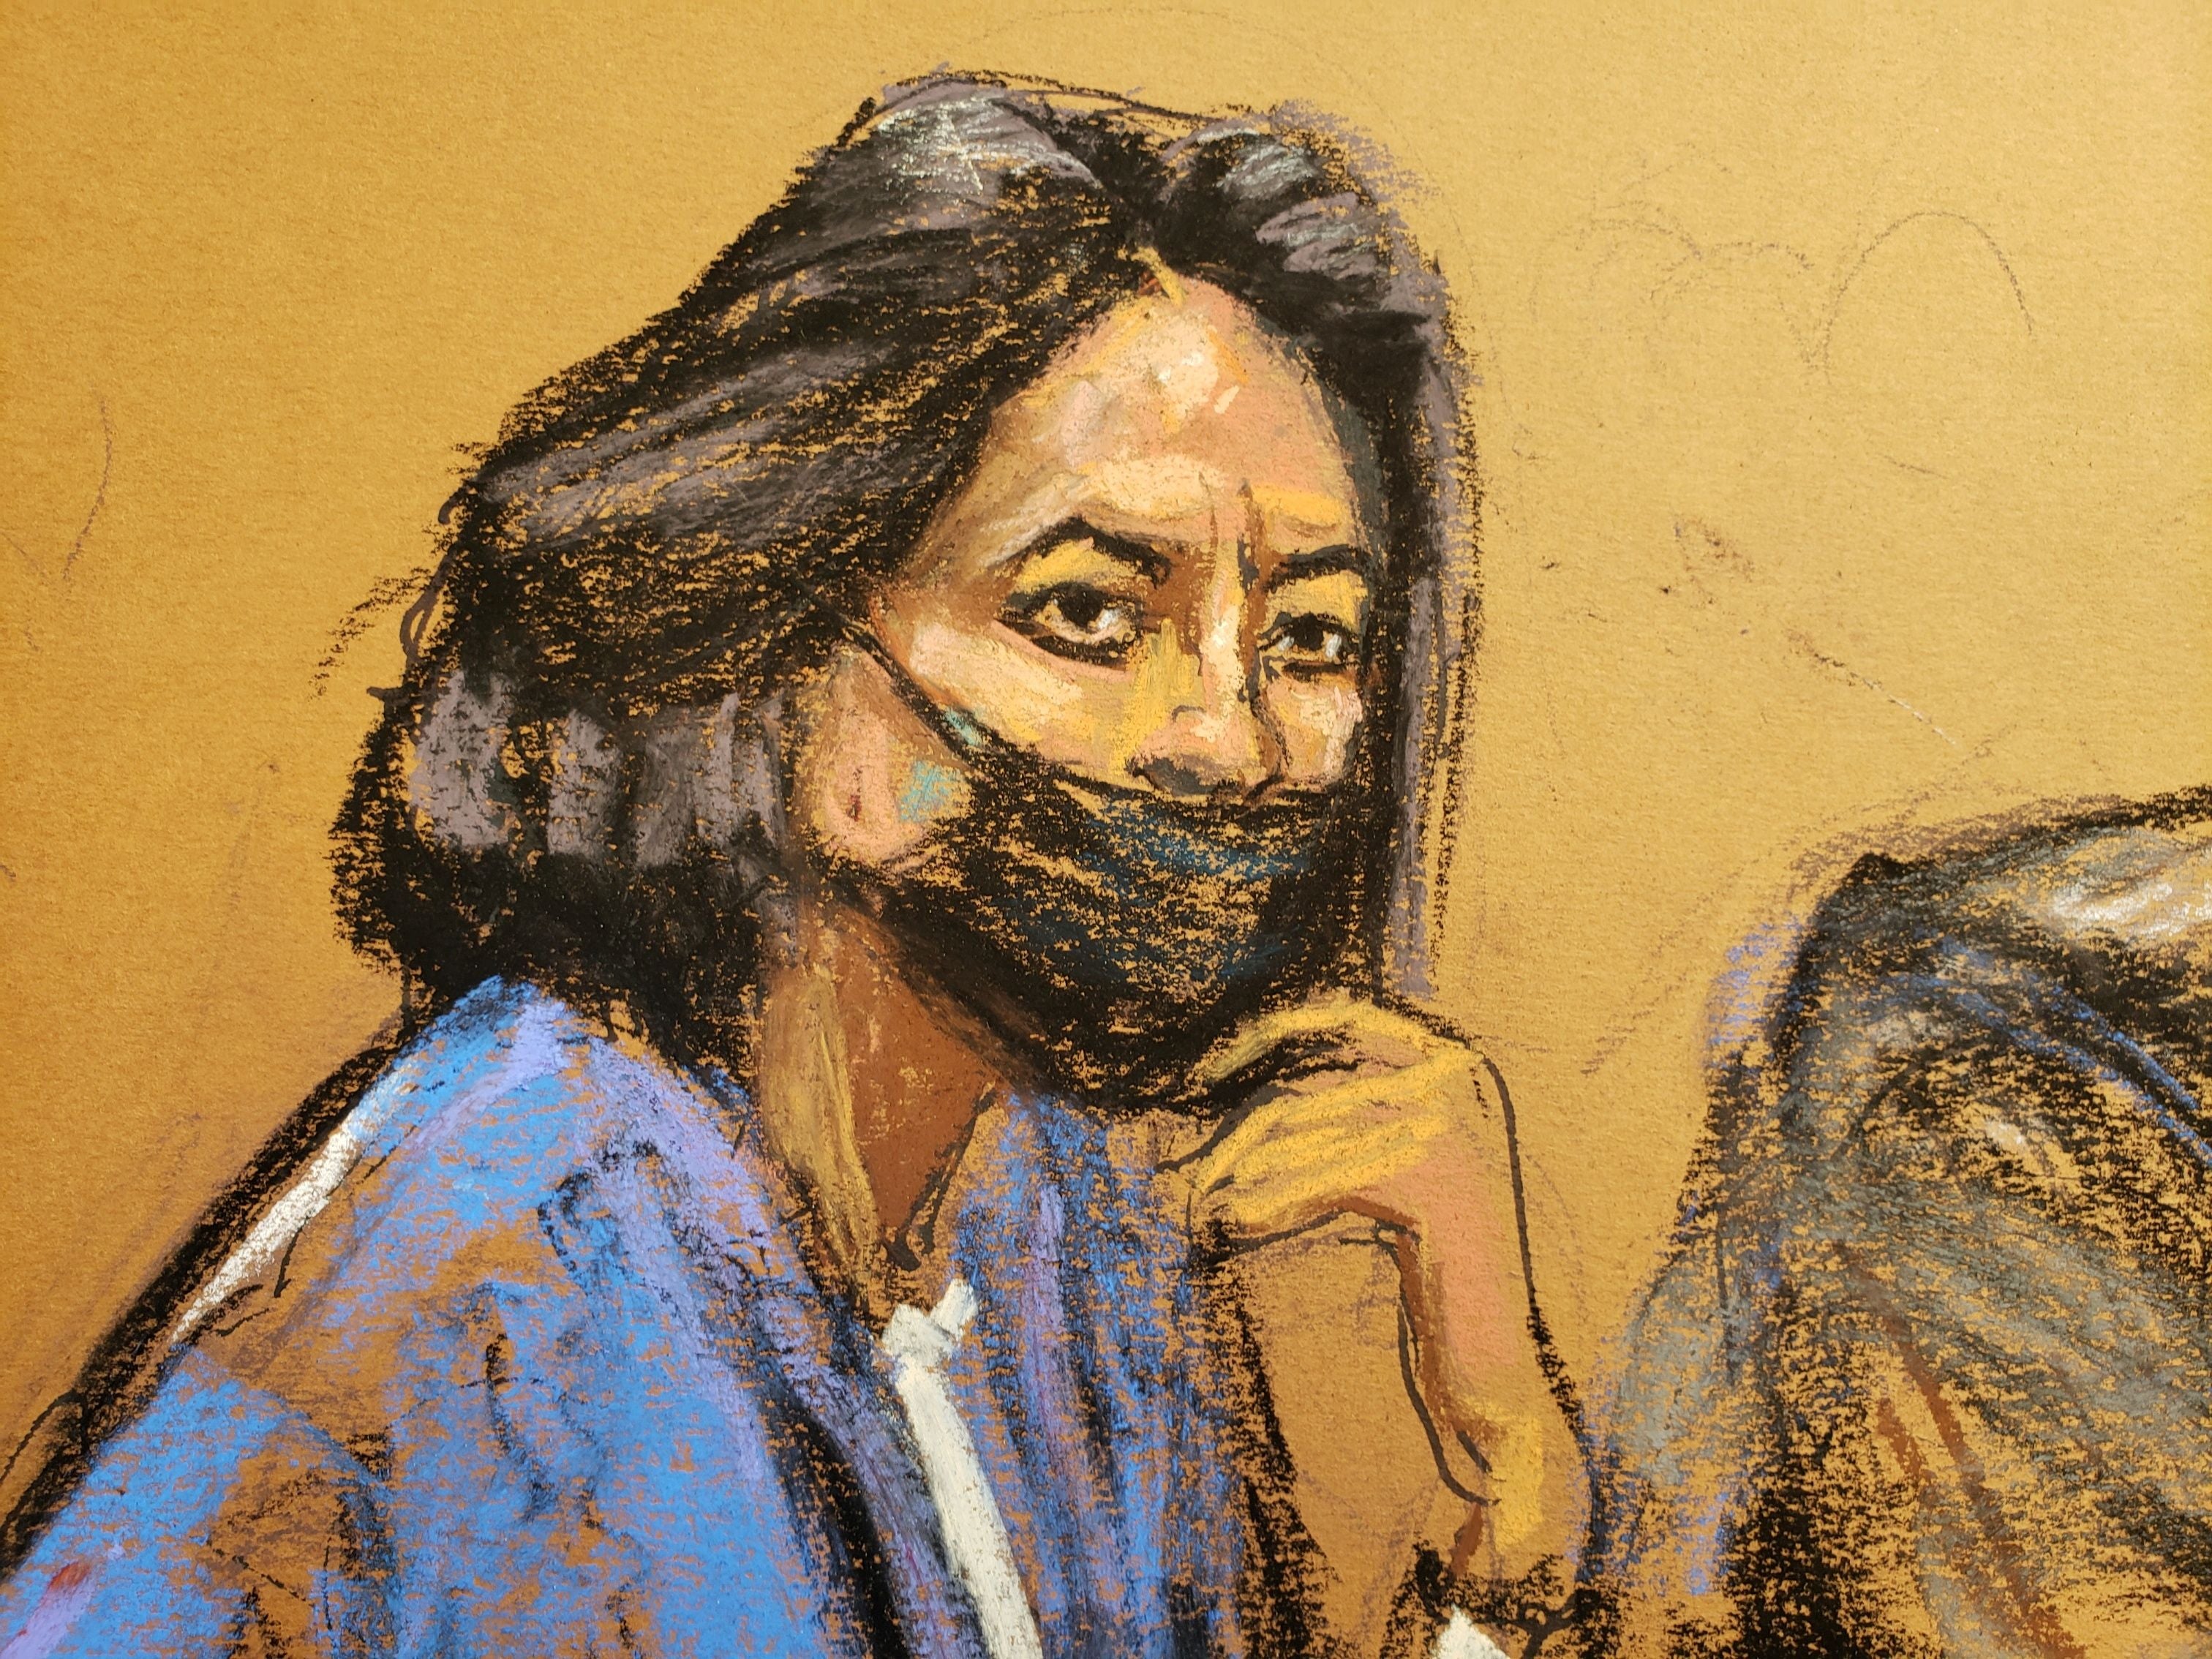 A sketch of Ghislaine Maxwell during a court appearance on 10 November